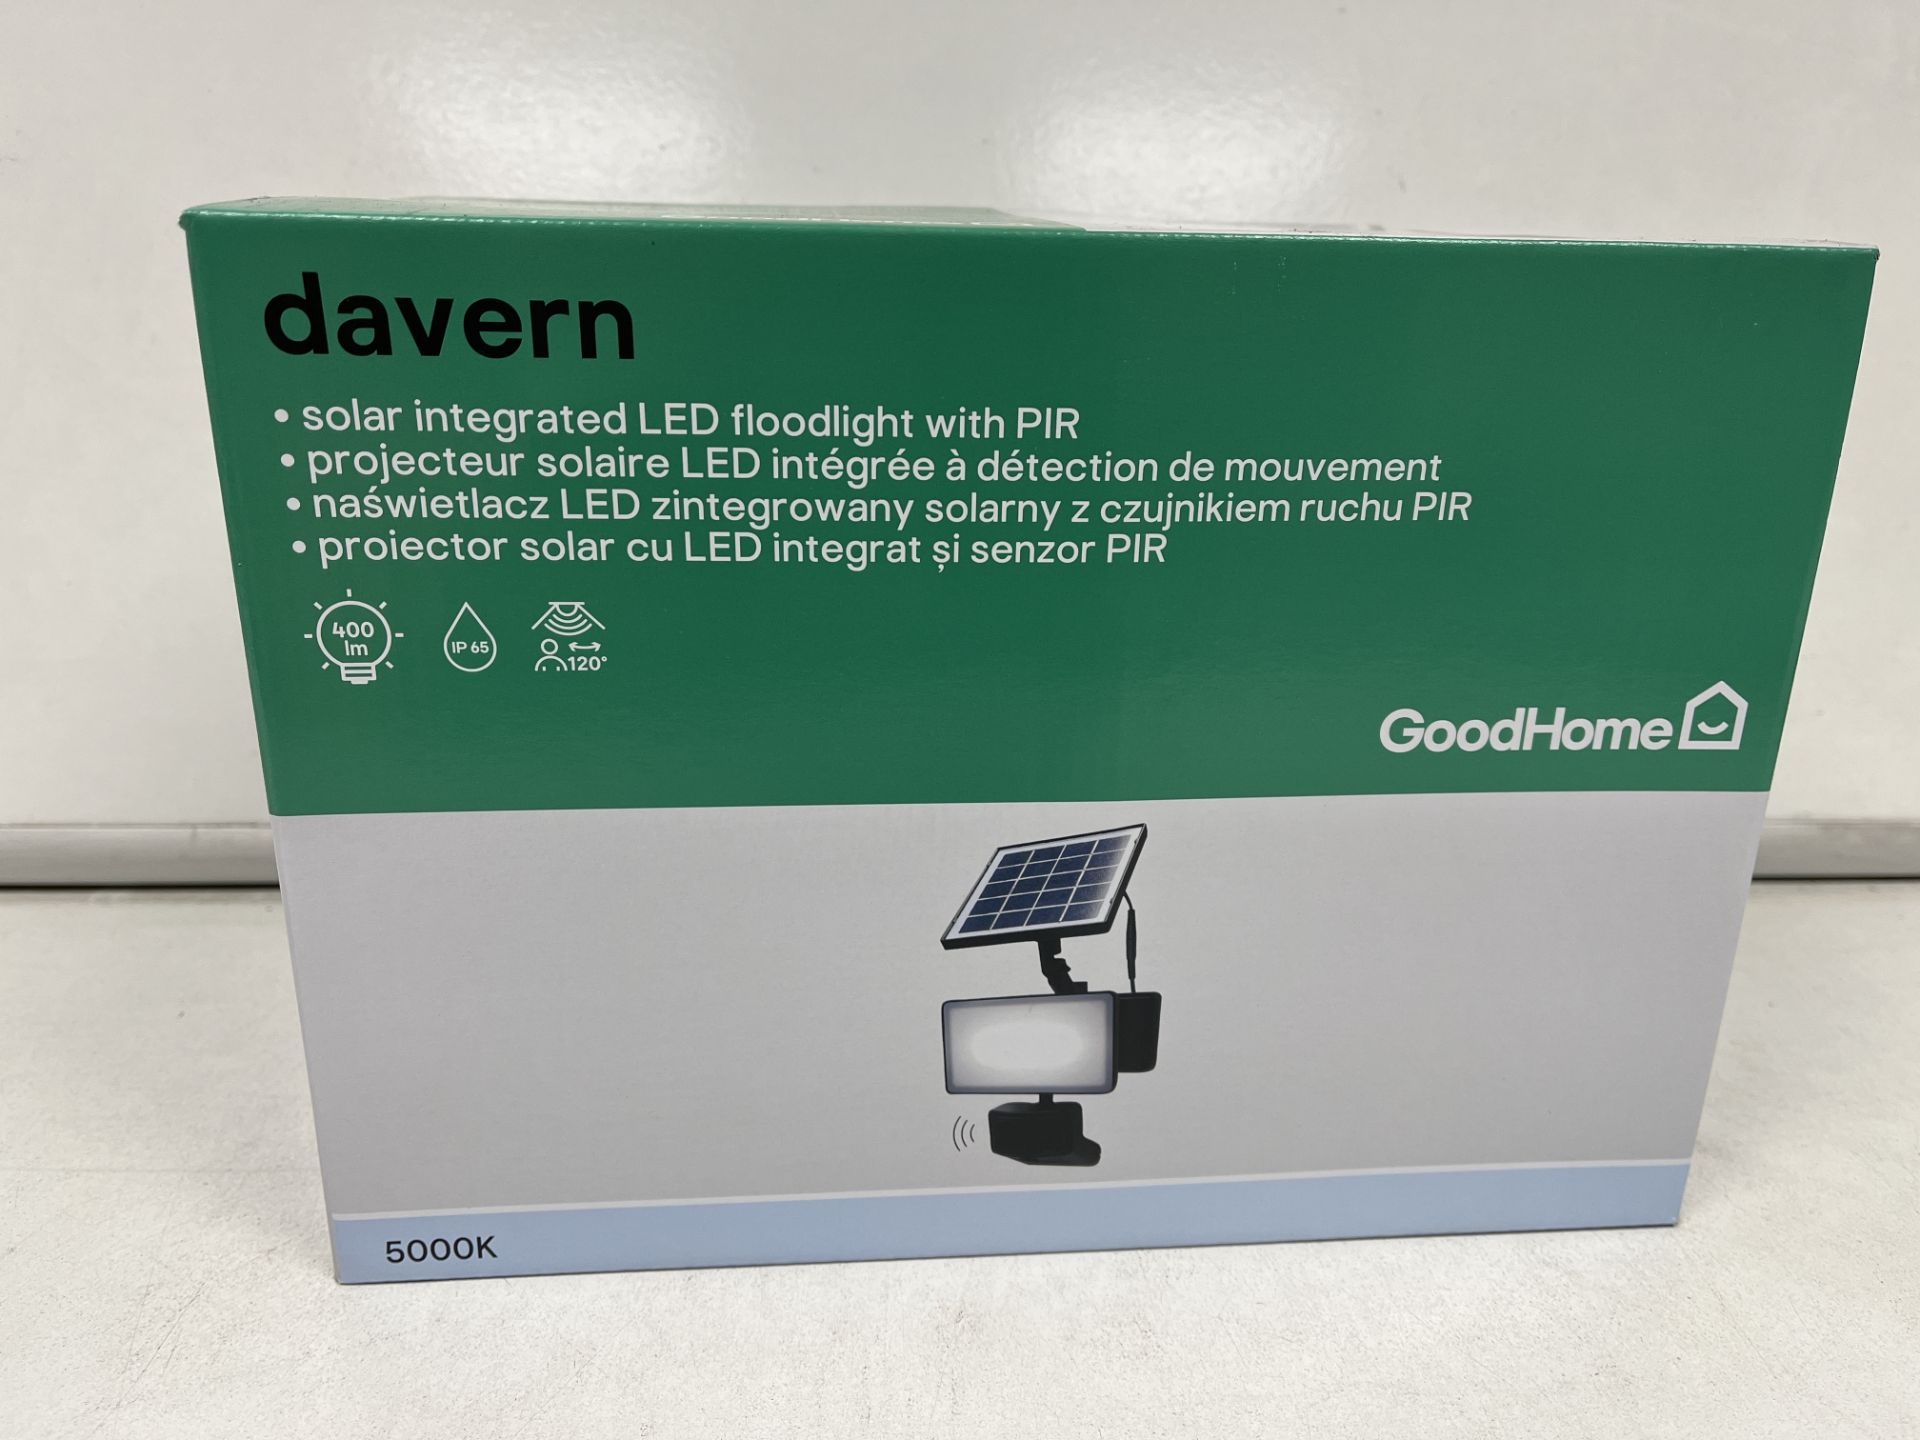 4 X NEW BOXED GOODHOME DAVERN SOLAR INTEGREATED LED FLOODLIGHT WITH PIR. 4000 LUMENS. 5000K. (ROW1.